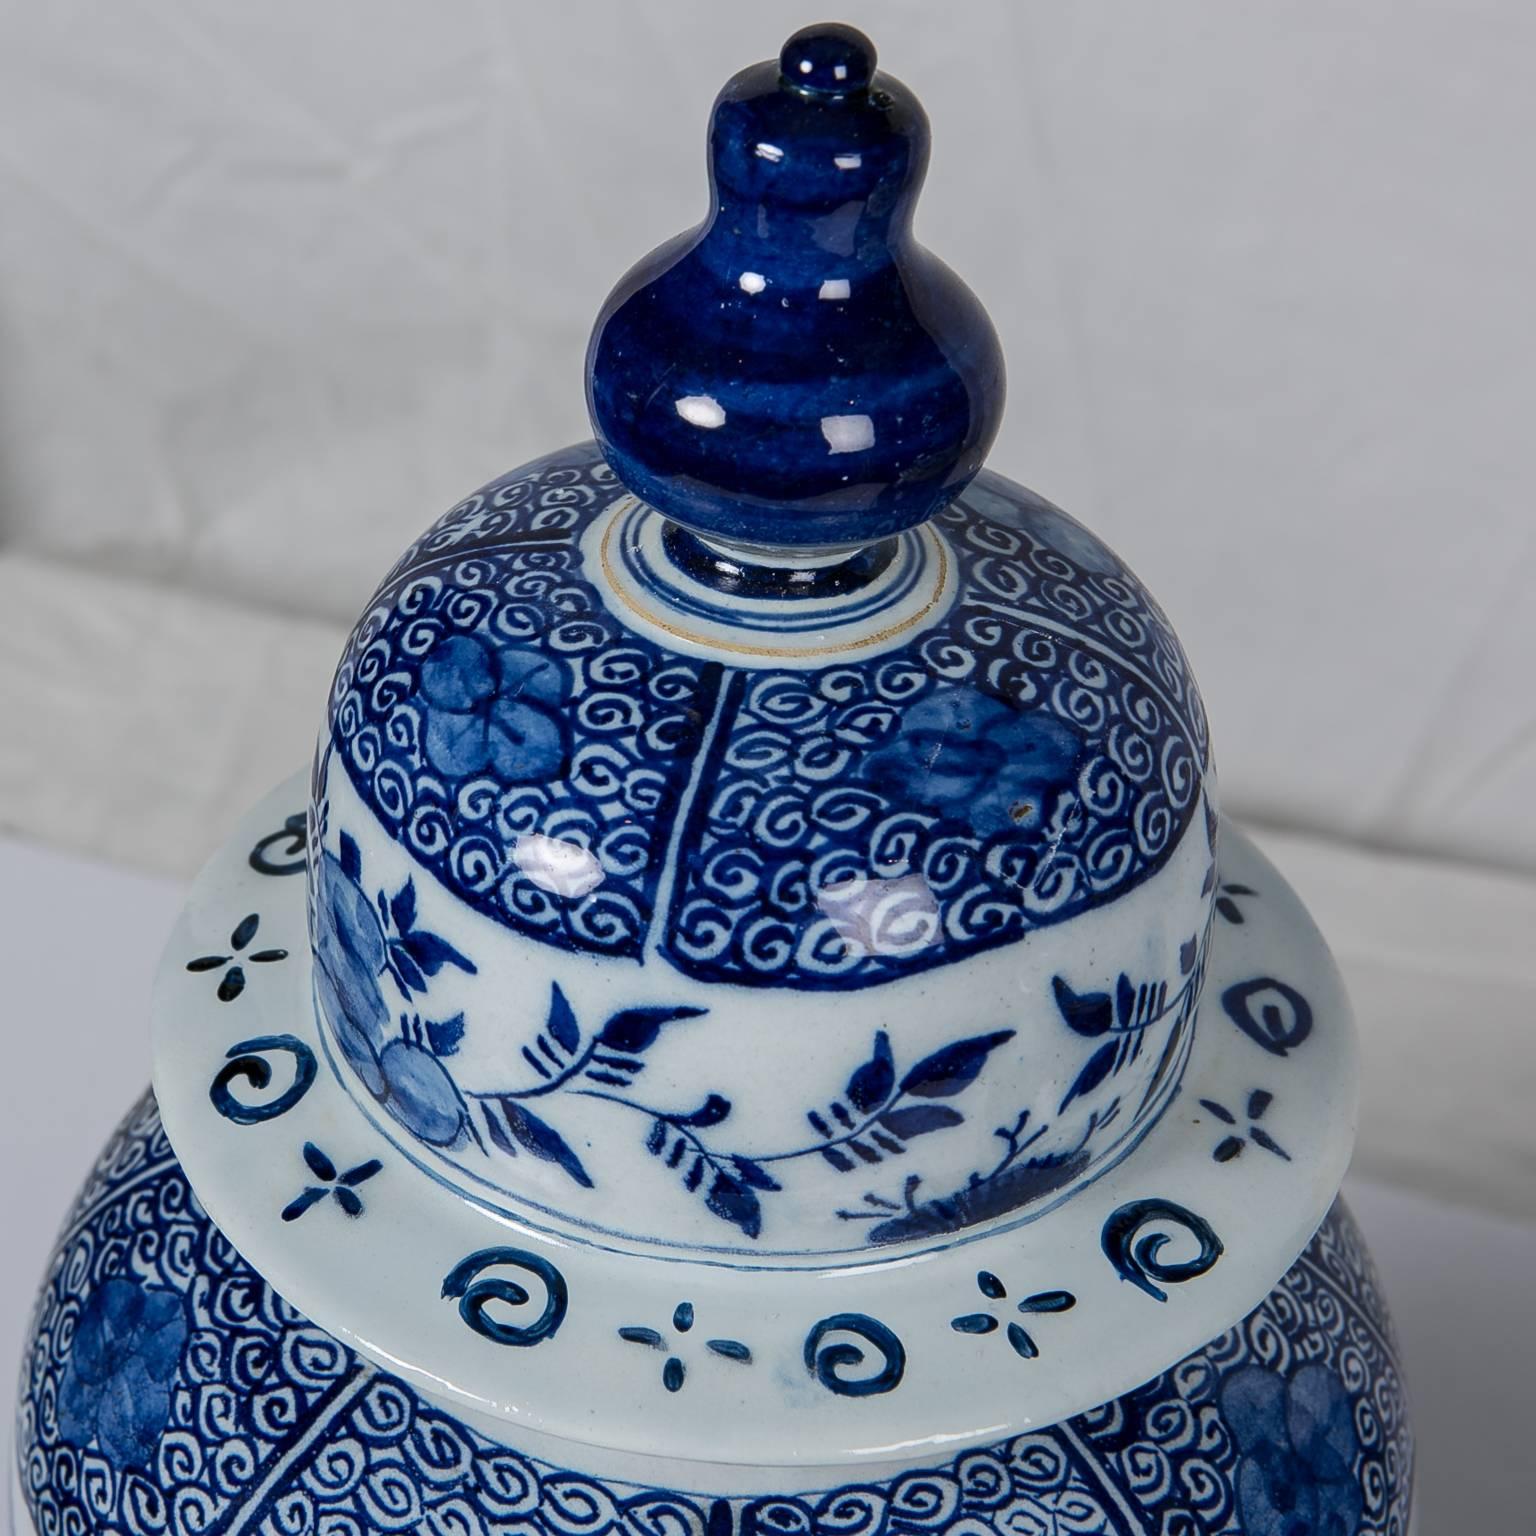 This Dutch Delft blue and white antique mantle jar is hand painted in a deep cobalt blue. 
The pot is decorated all around with sprays of chrysanthemums. 
The top, shoulders, and base are painted with scrolling vines and flower heads.
Made in The